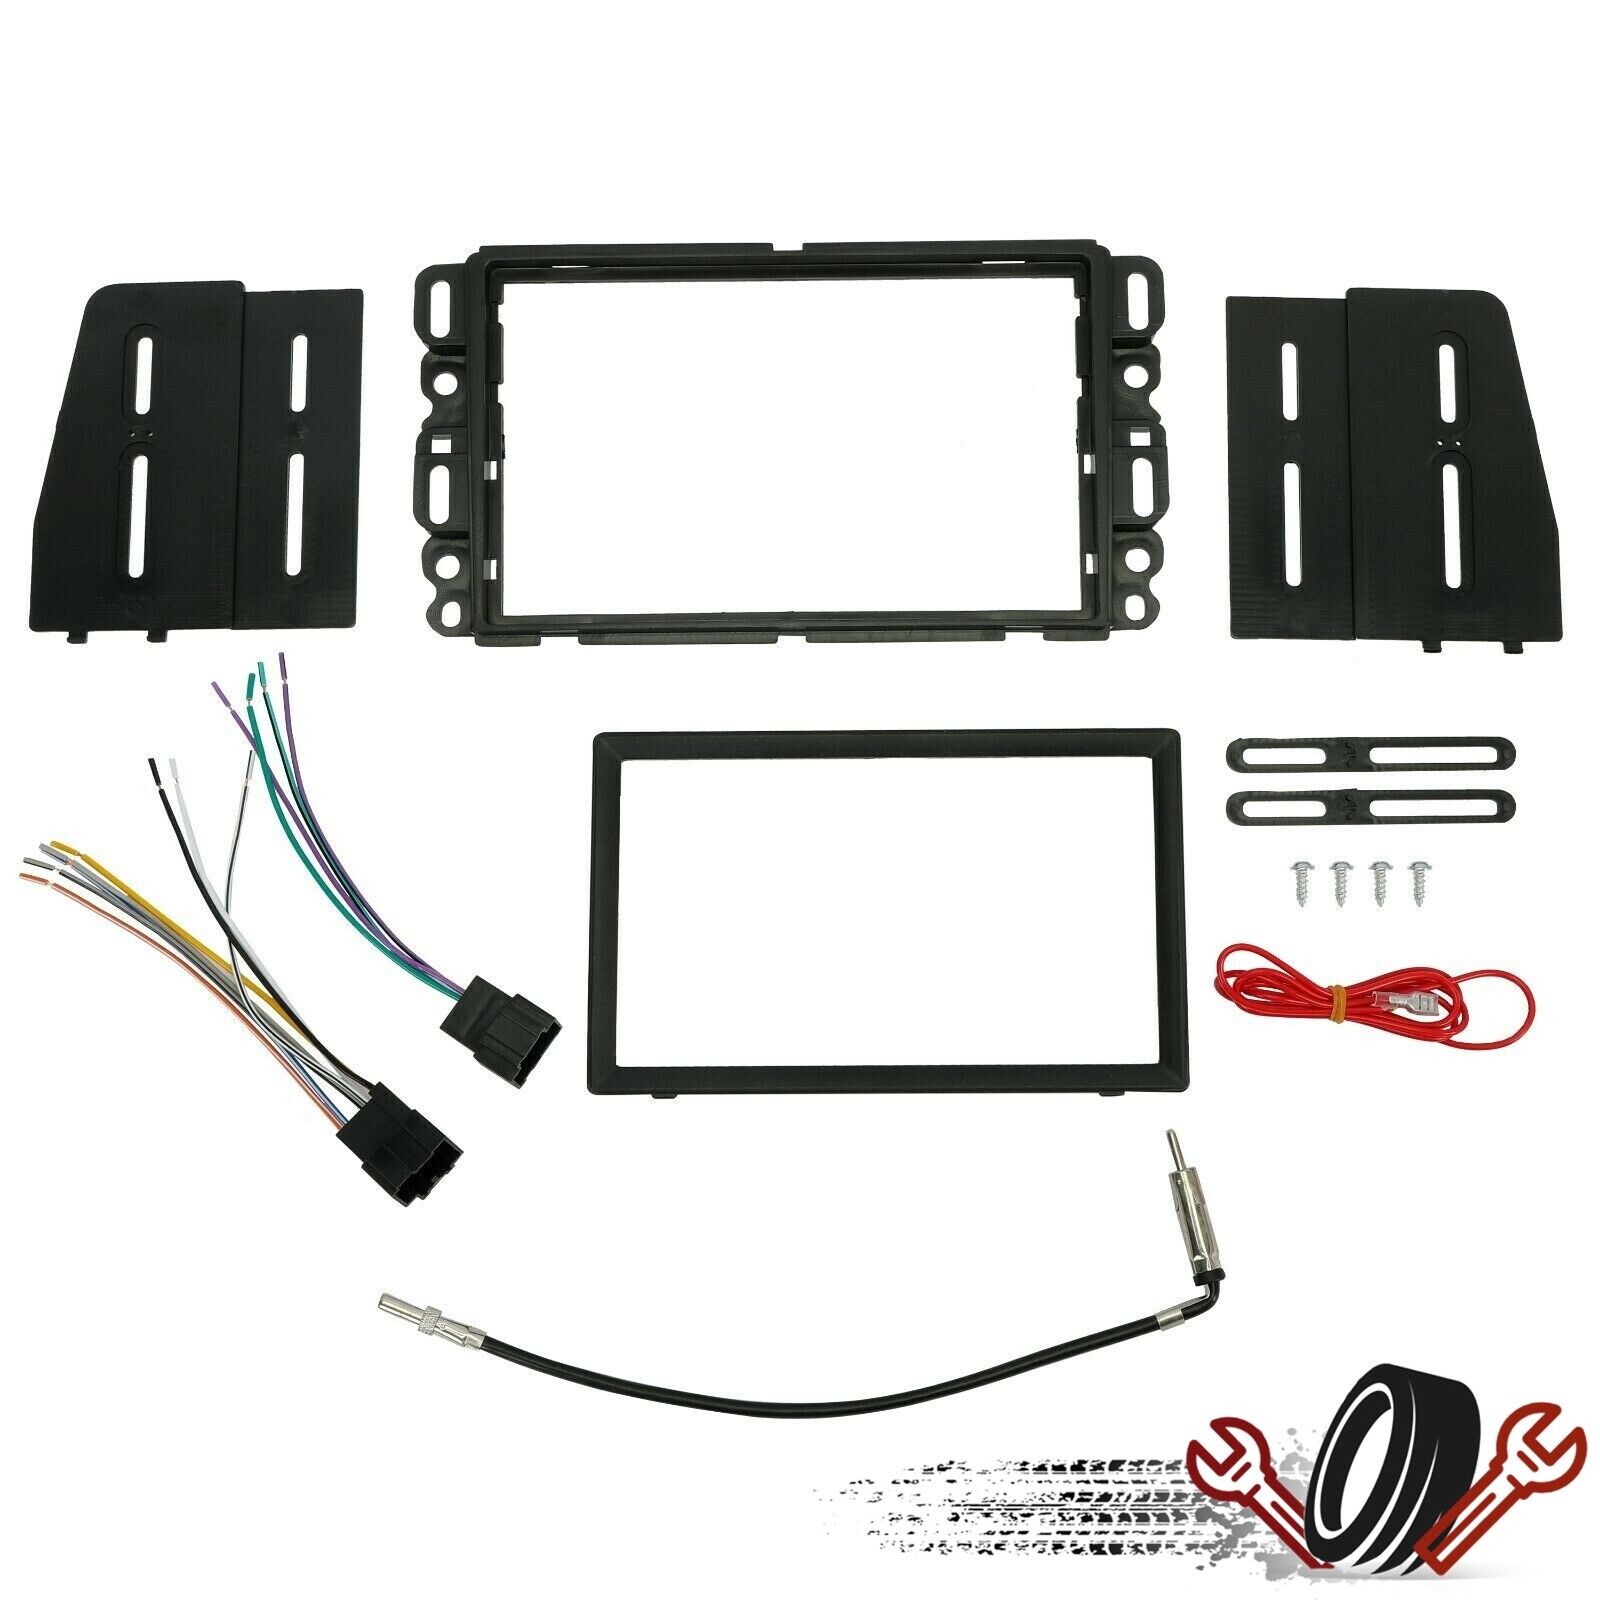 Double Din Dash Kit Stereo Radio Installation Install Kit w Wire Harness Antenna